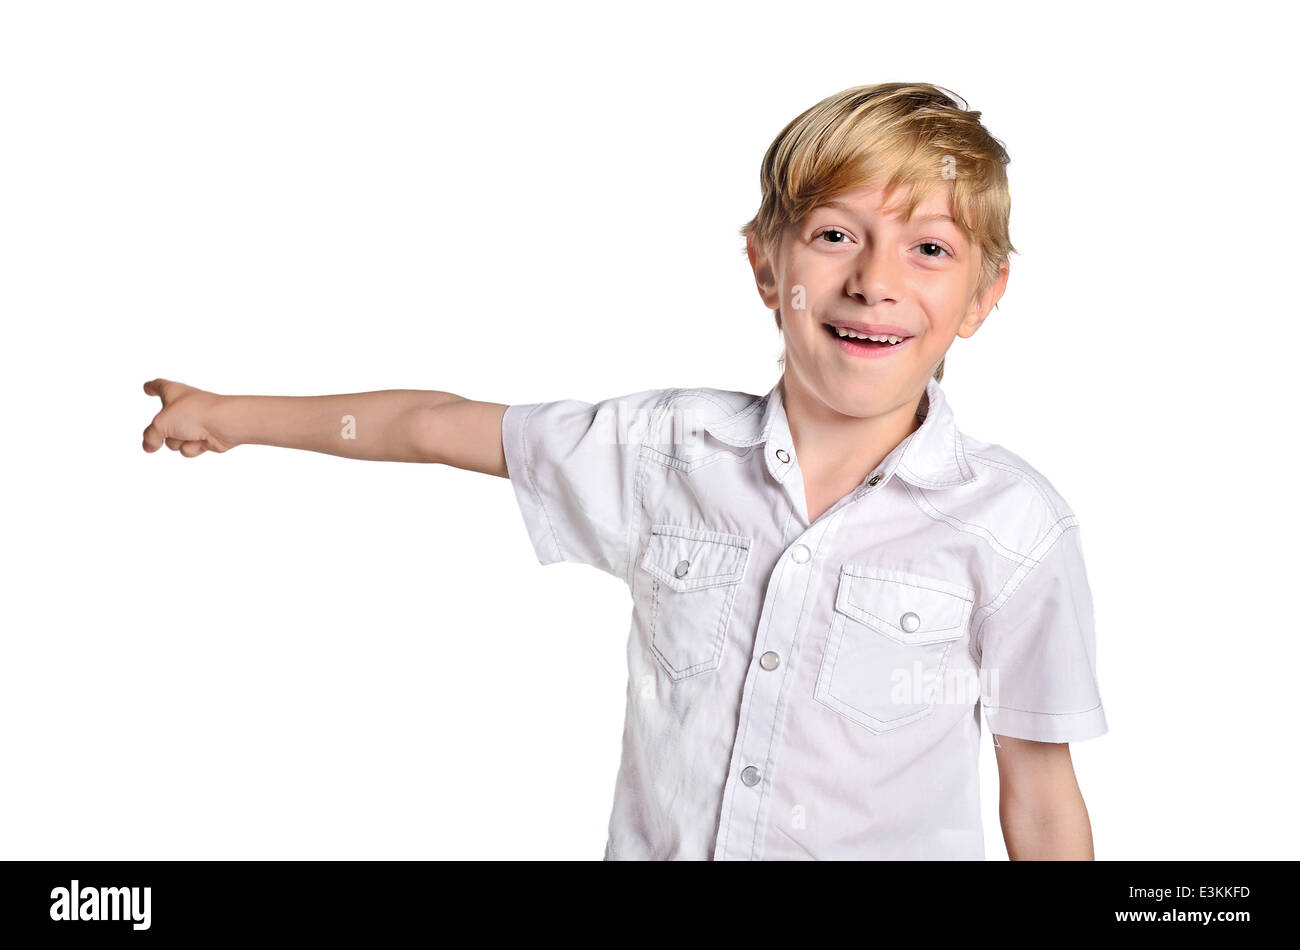 adorable arm beautiful boy child childhood command confident content curious cute demonstrate direction emotion expression backg Stock Photo